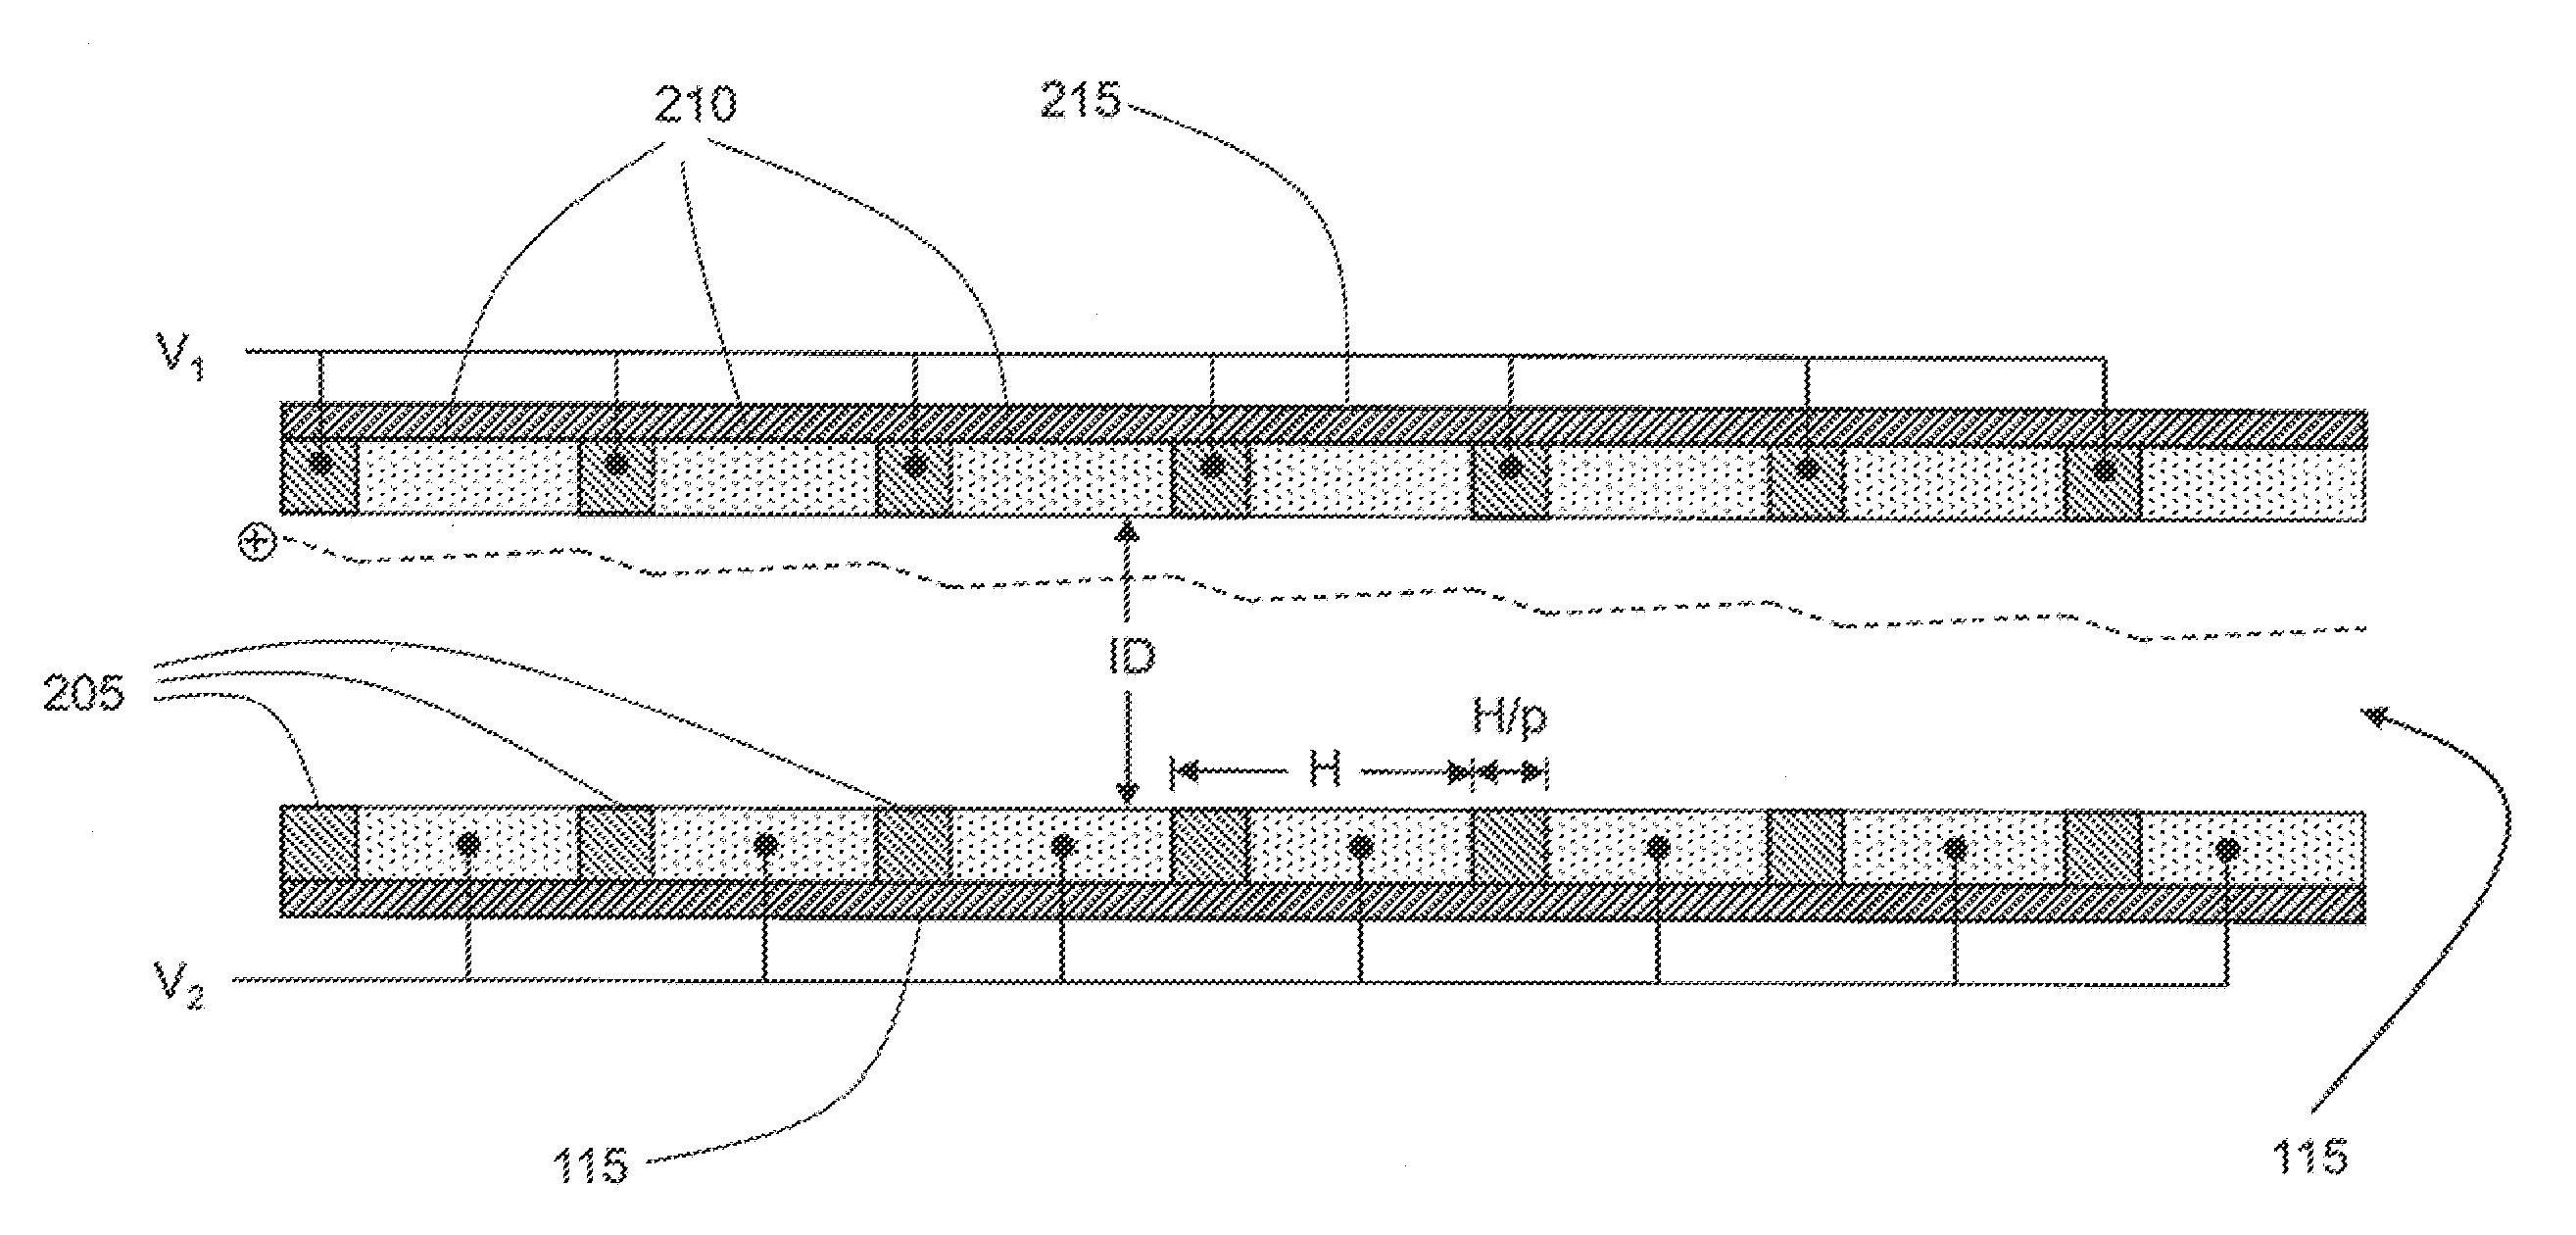 Ion transfer tube with spatially alternating DC fields